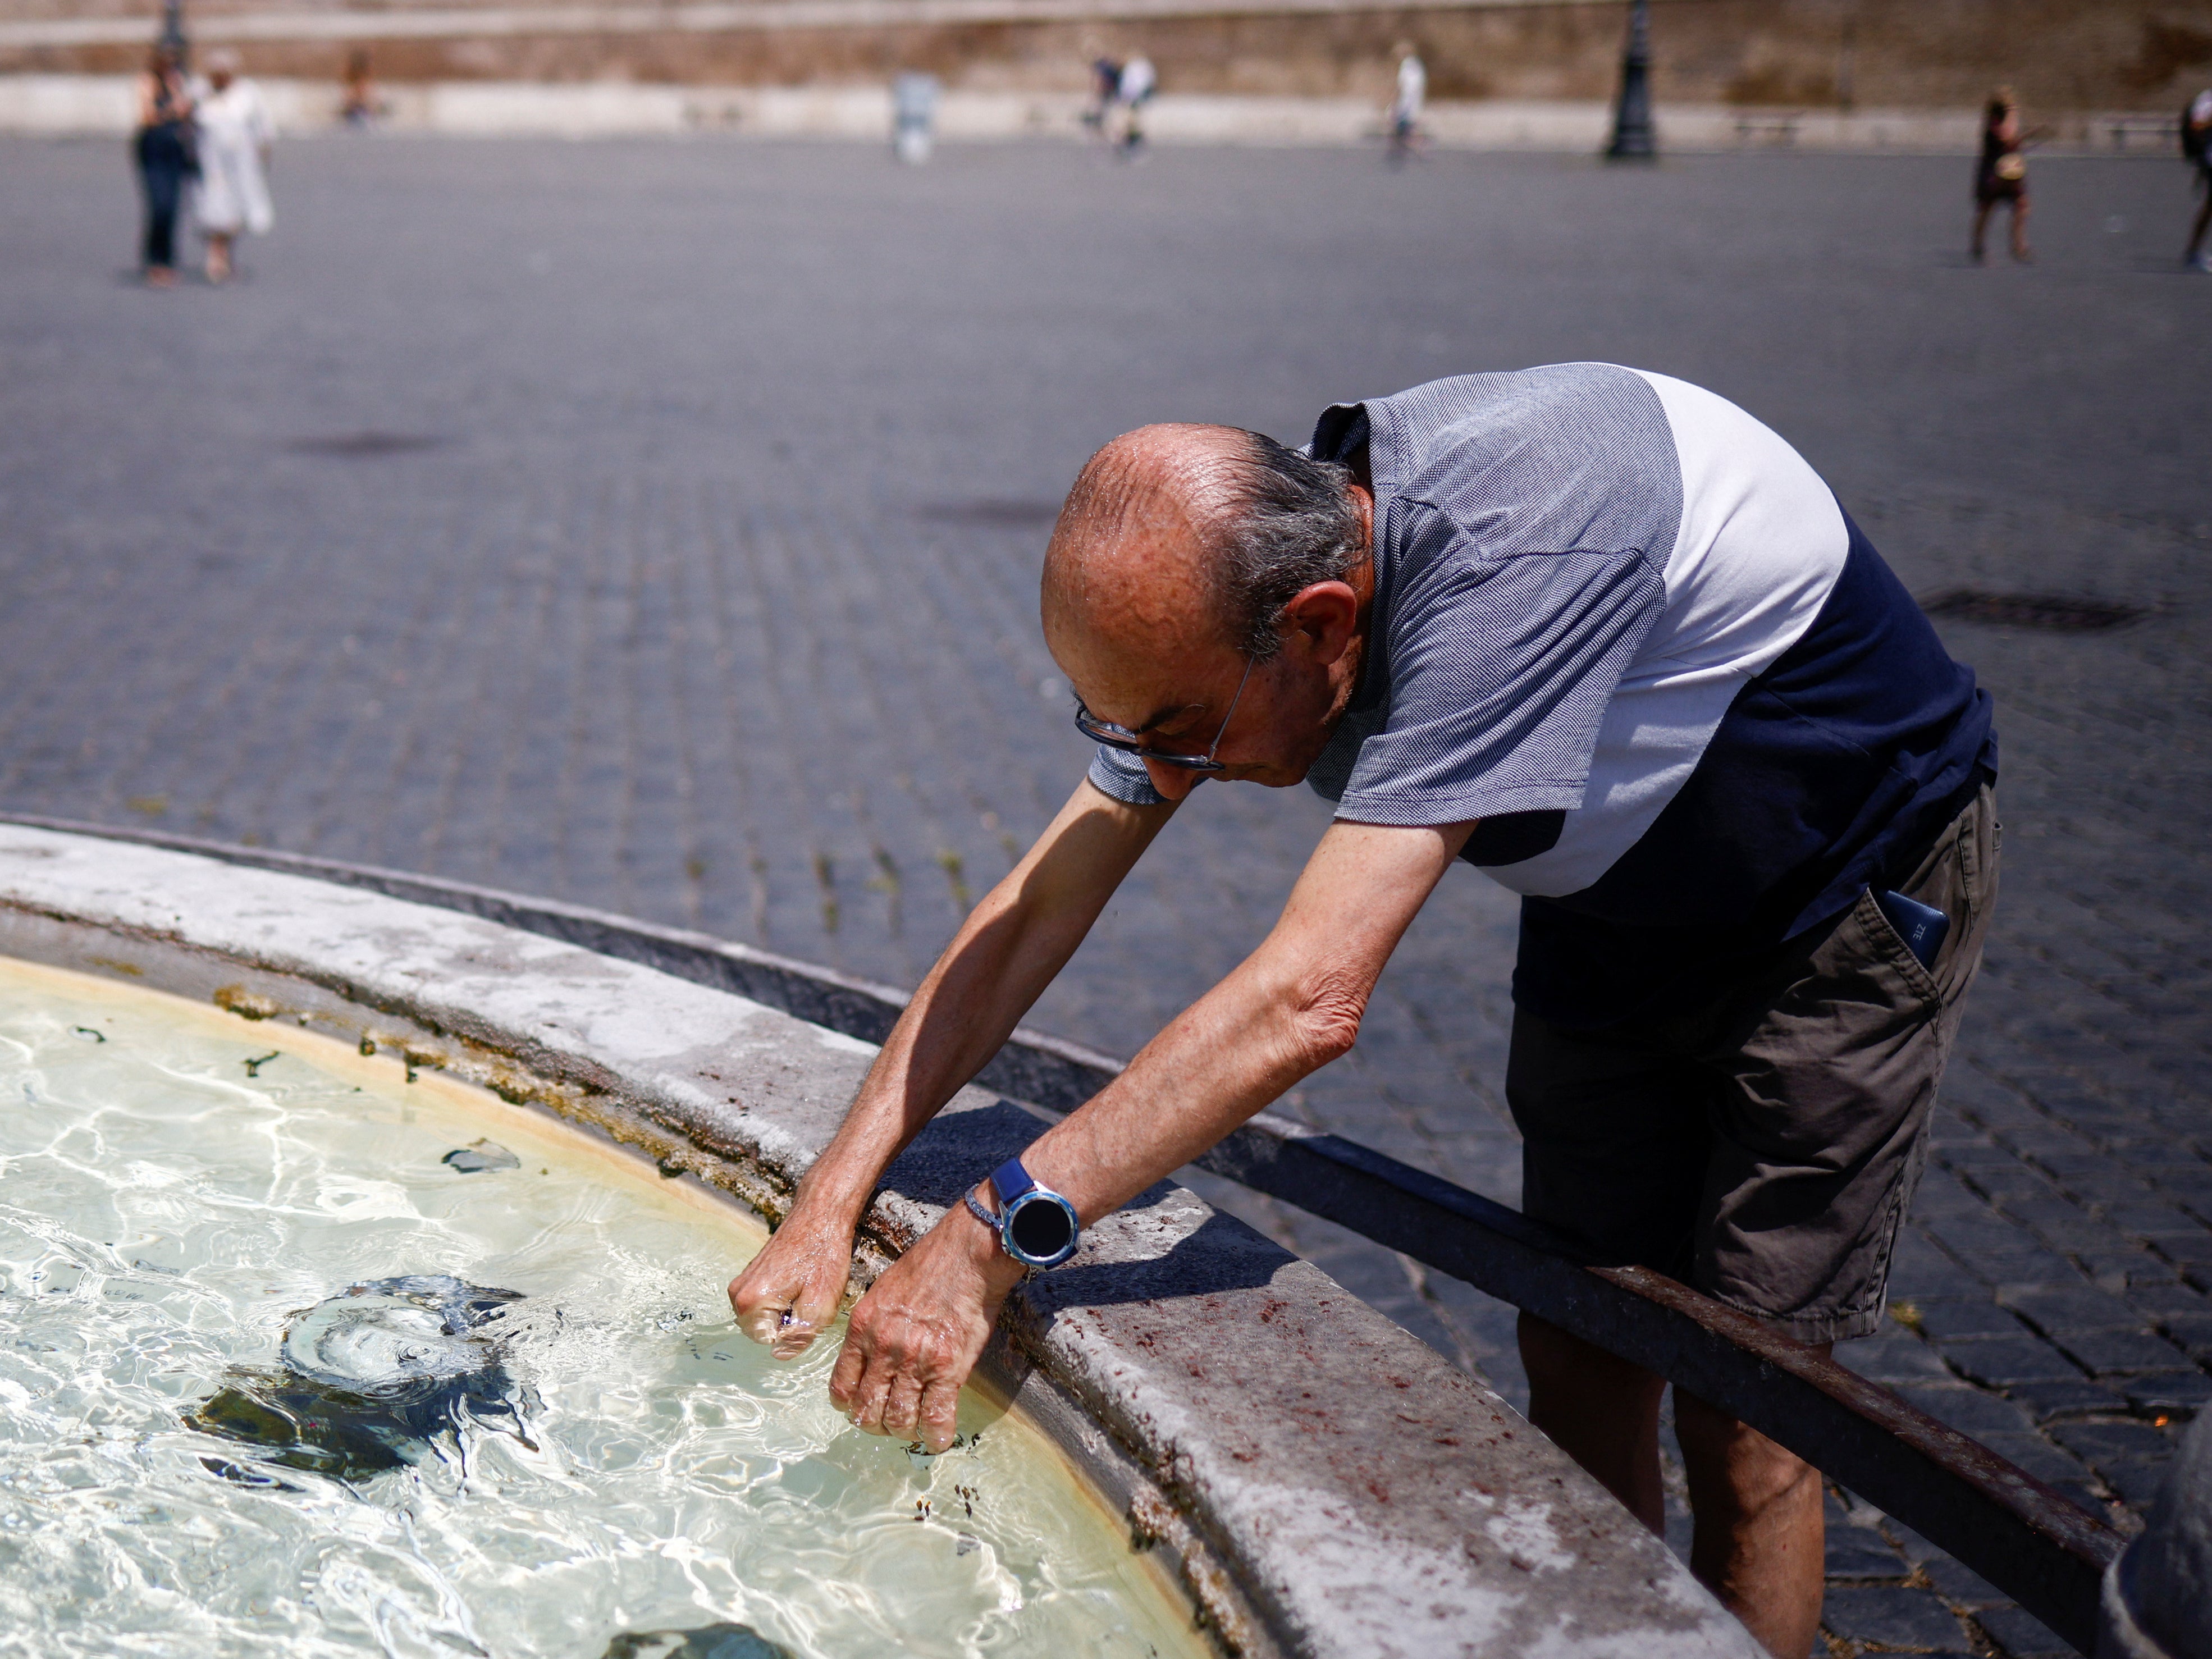 A man cools off at a fountain in Rome